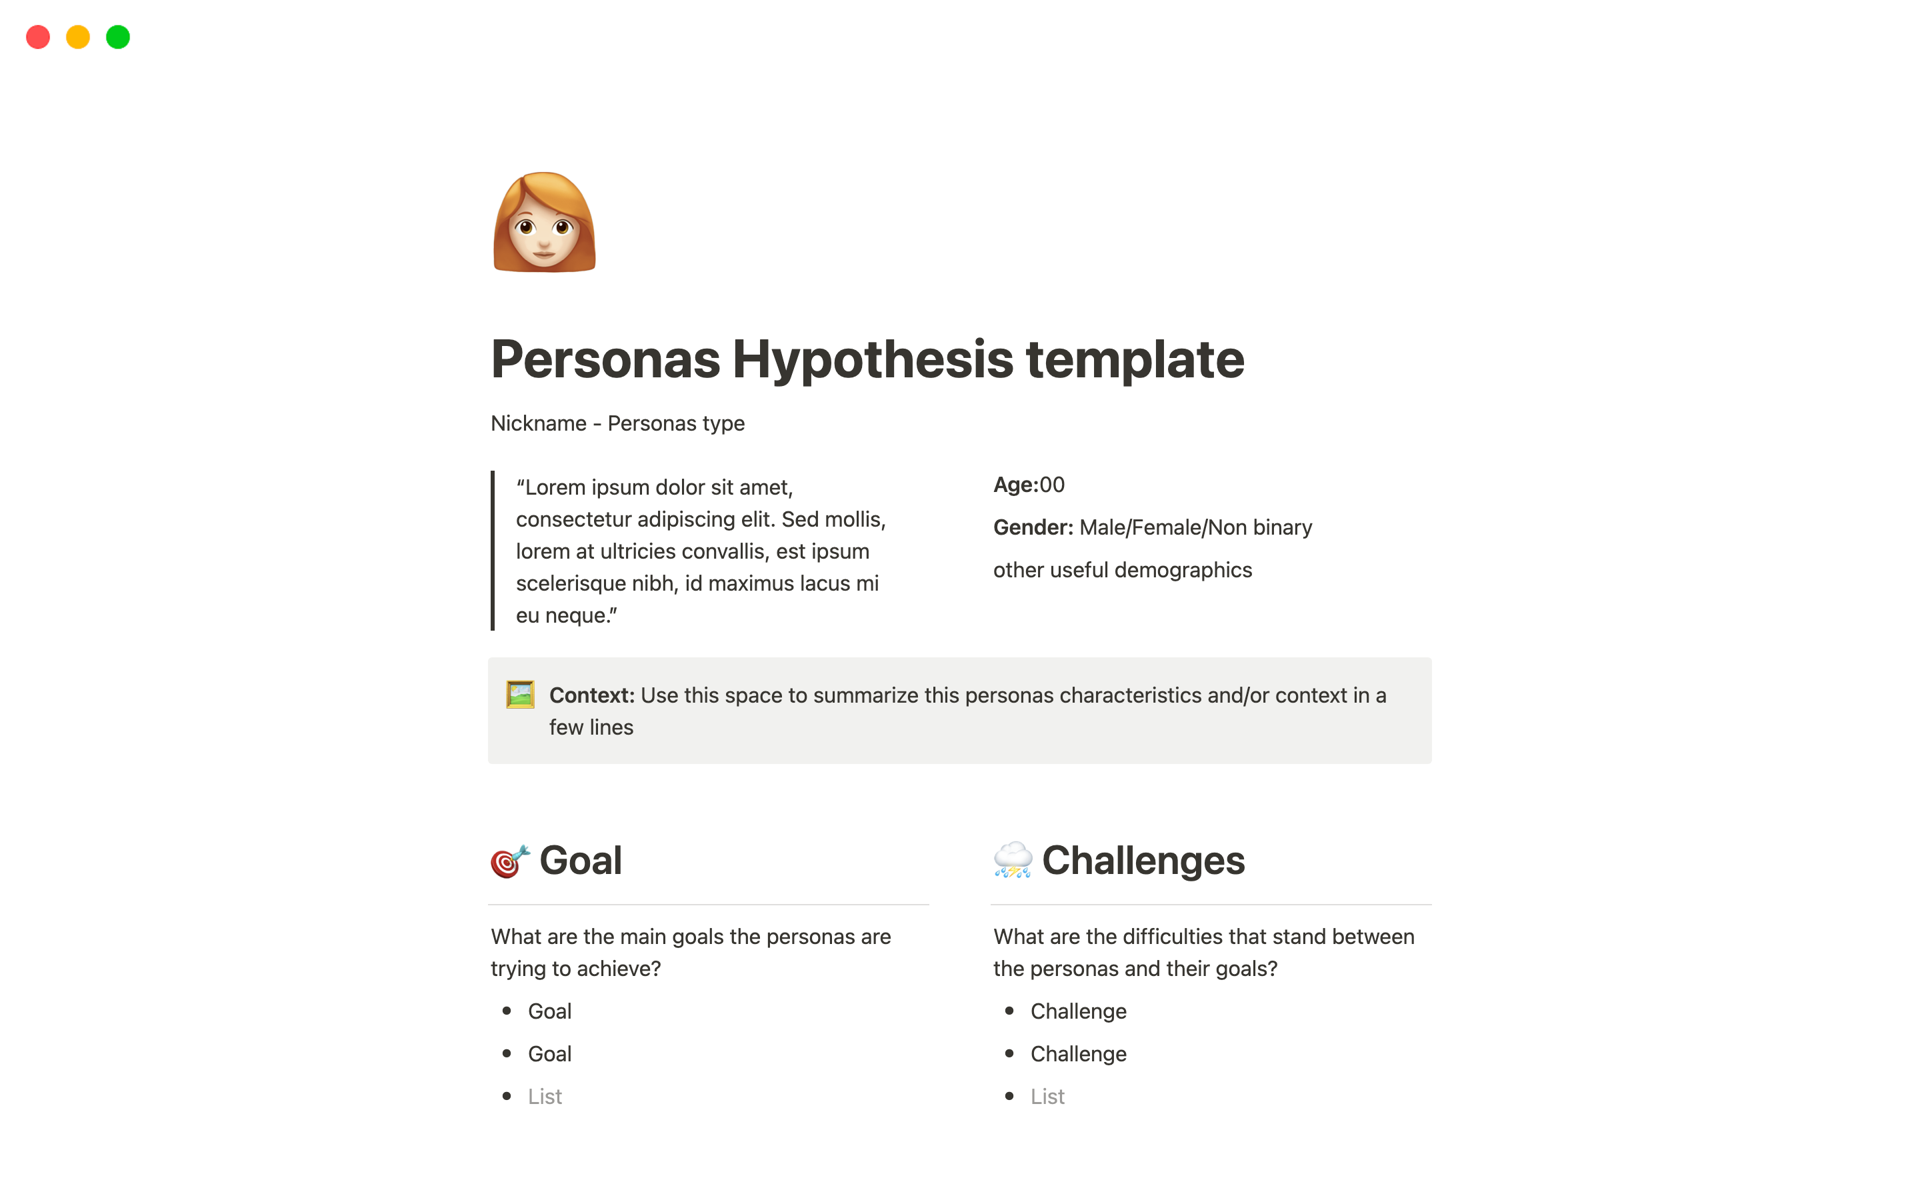 This template collects information useful to define a Personas hypothesis.